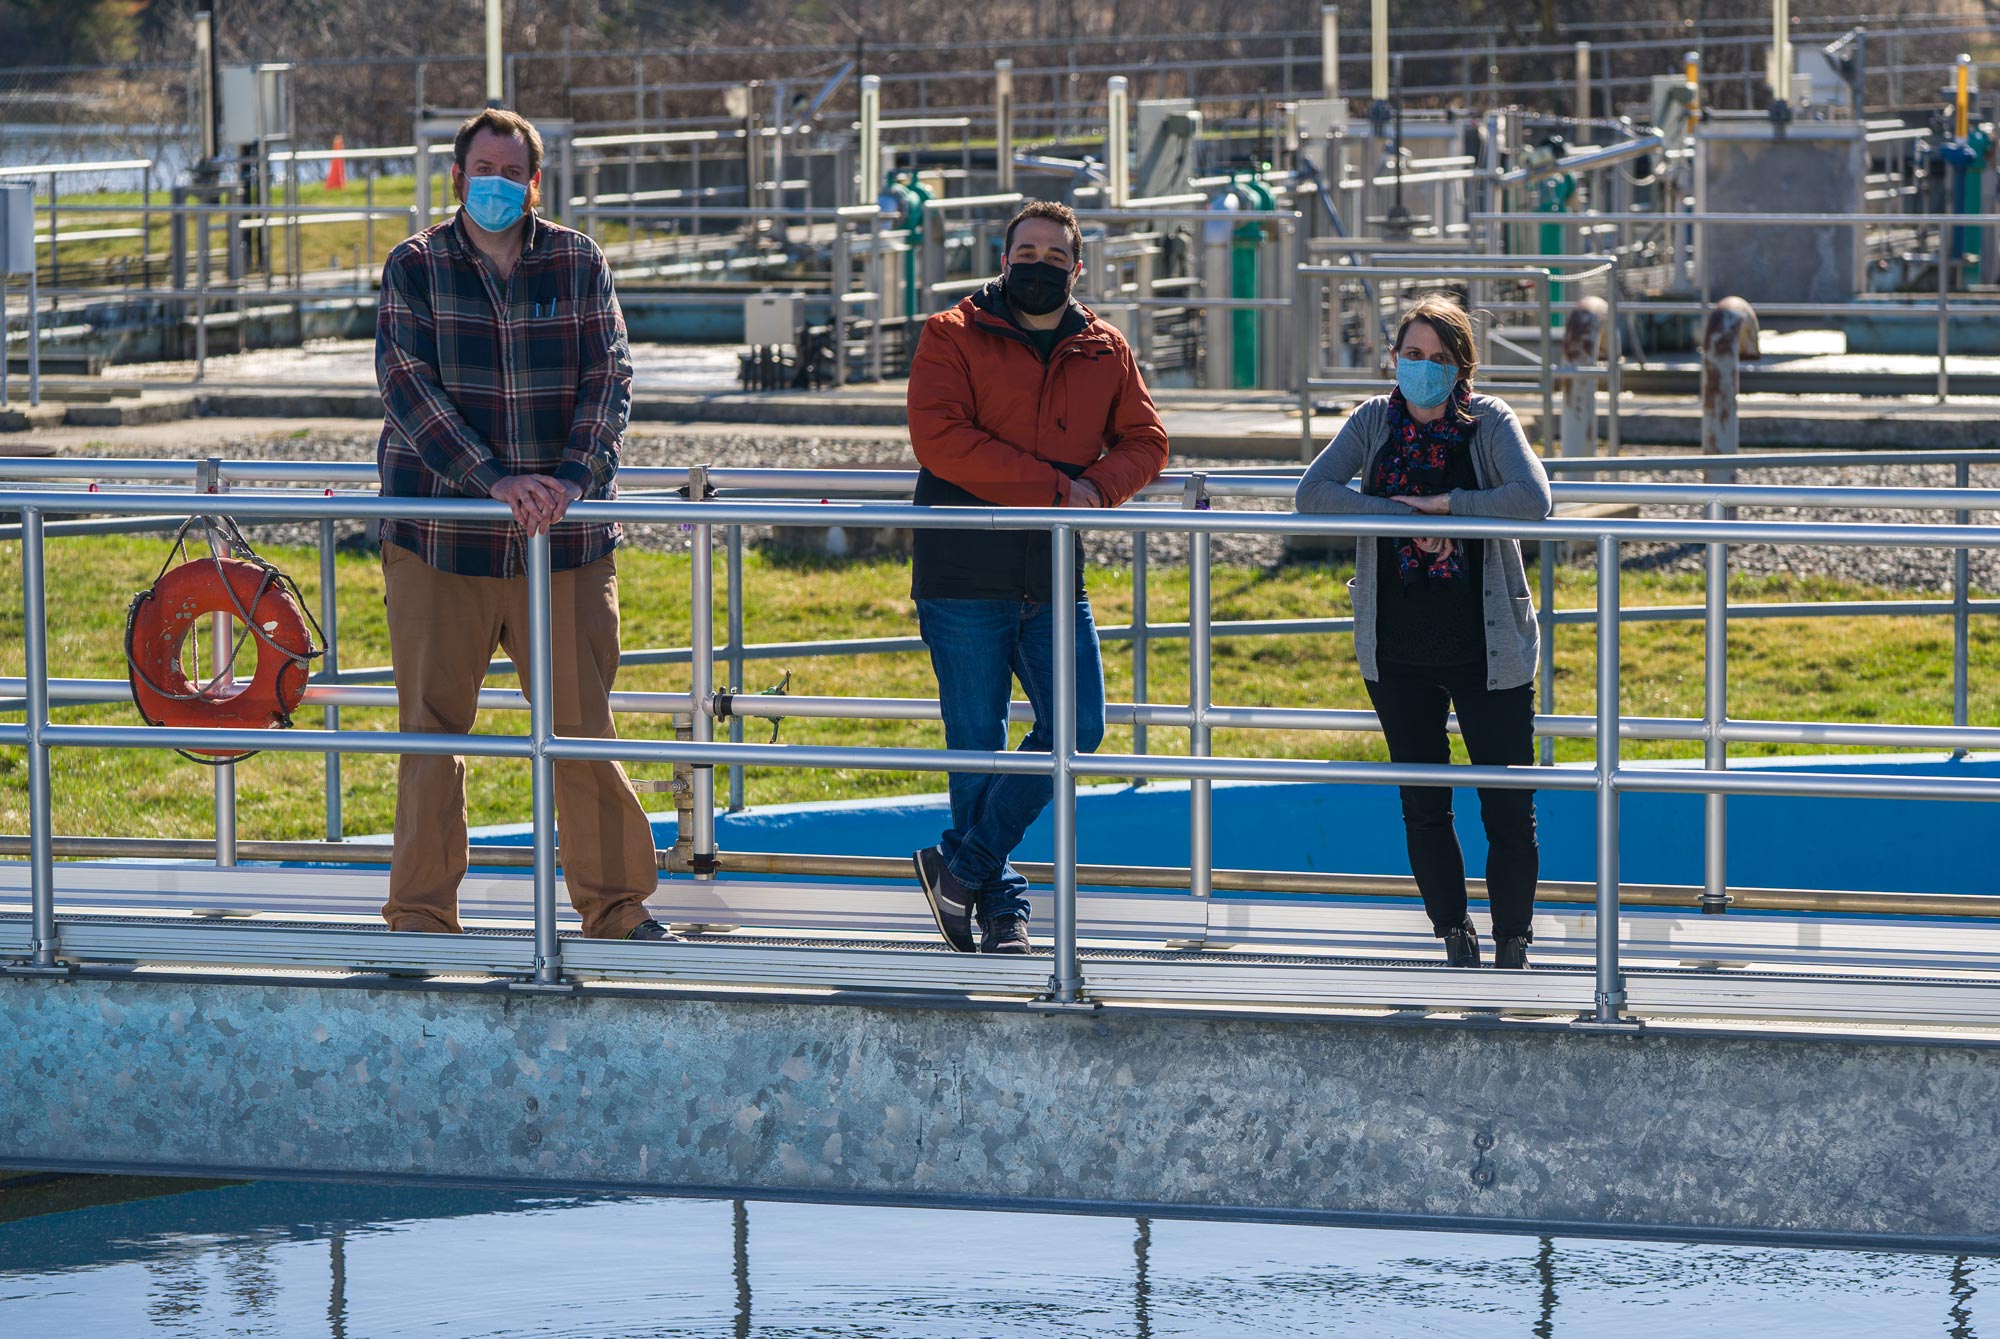 Paula Mouser and lab members Kellen Sawyer ‘21G (left) and Fabrizio Colosimo, postdoctoral researcher (center) sample for viral biomarkers of COVID-19 at Durham’s wastewater treatment plant.